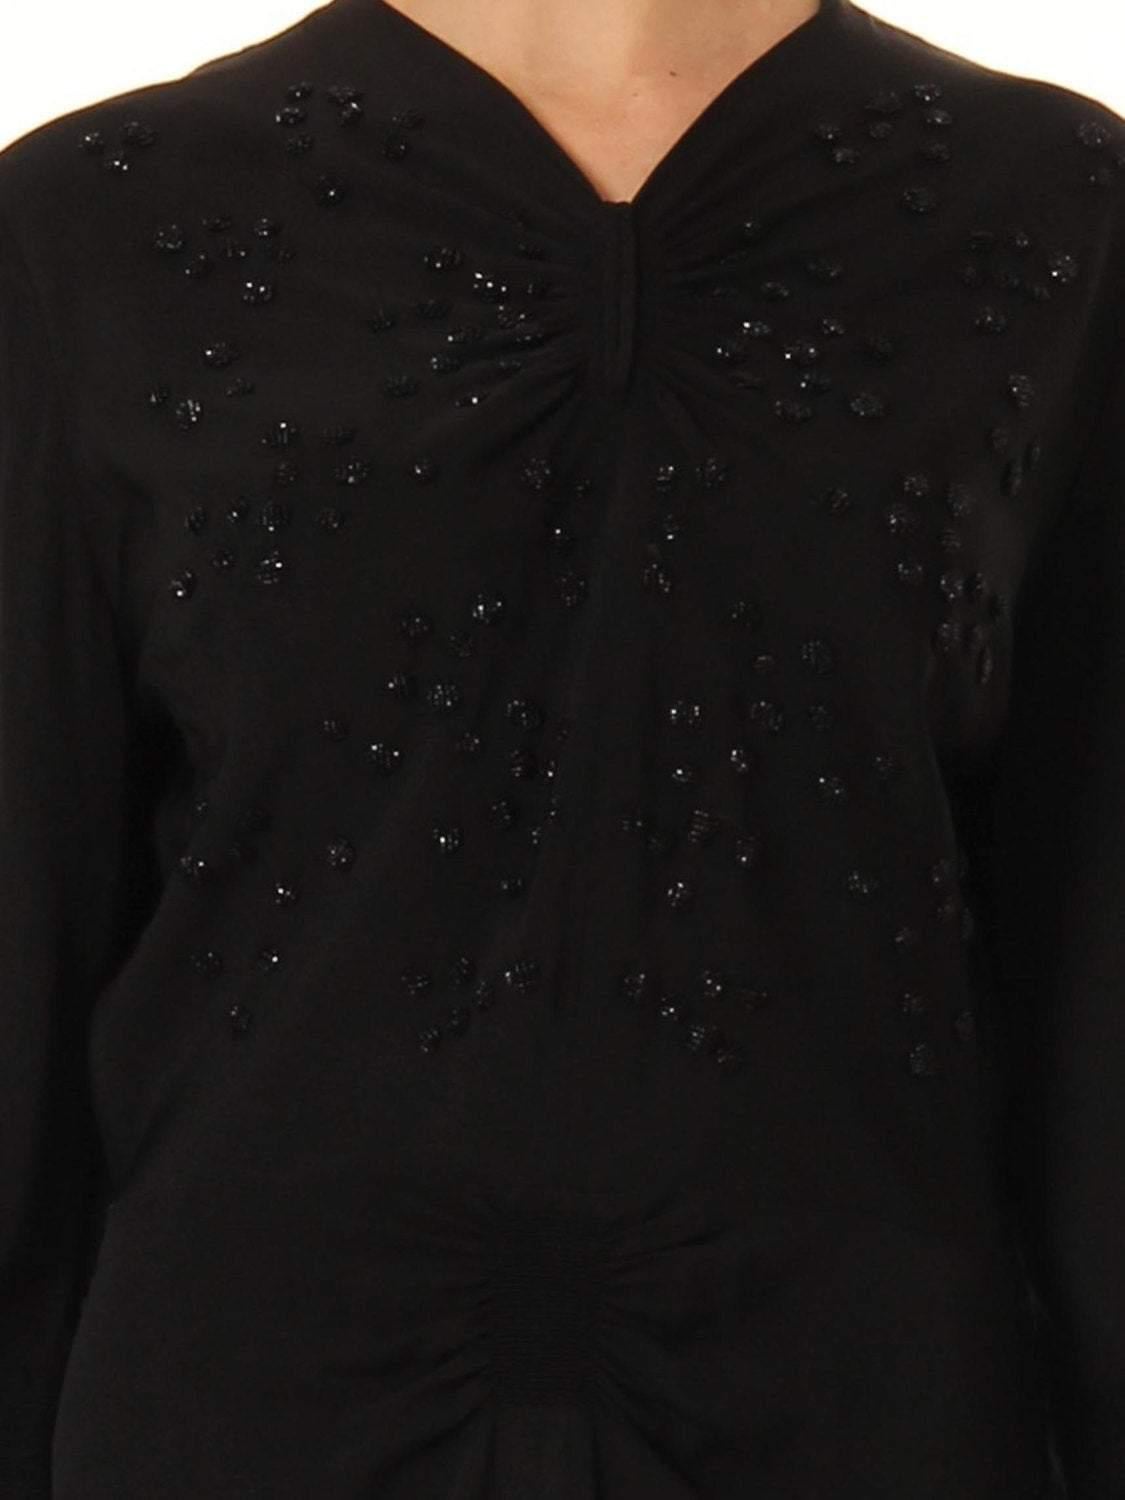 1940S Black Silk Faille Long Sleeve Polka Dot Beaded Cocktail Dress Gathered On In Excellent Condition For Sale In New York, NY